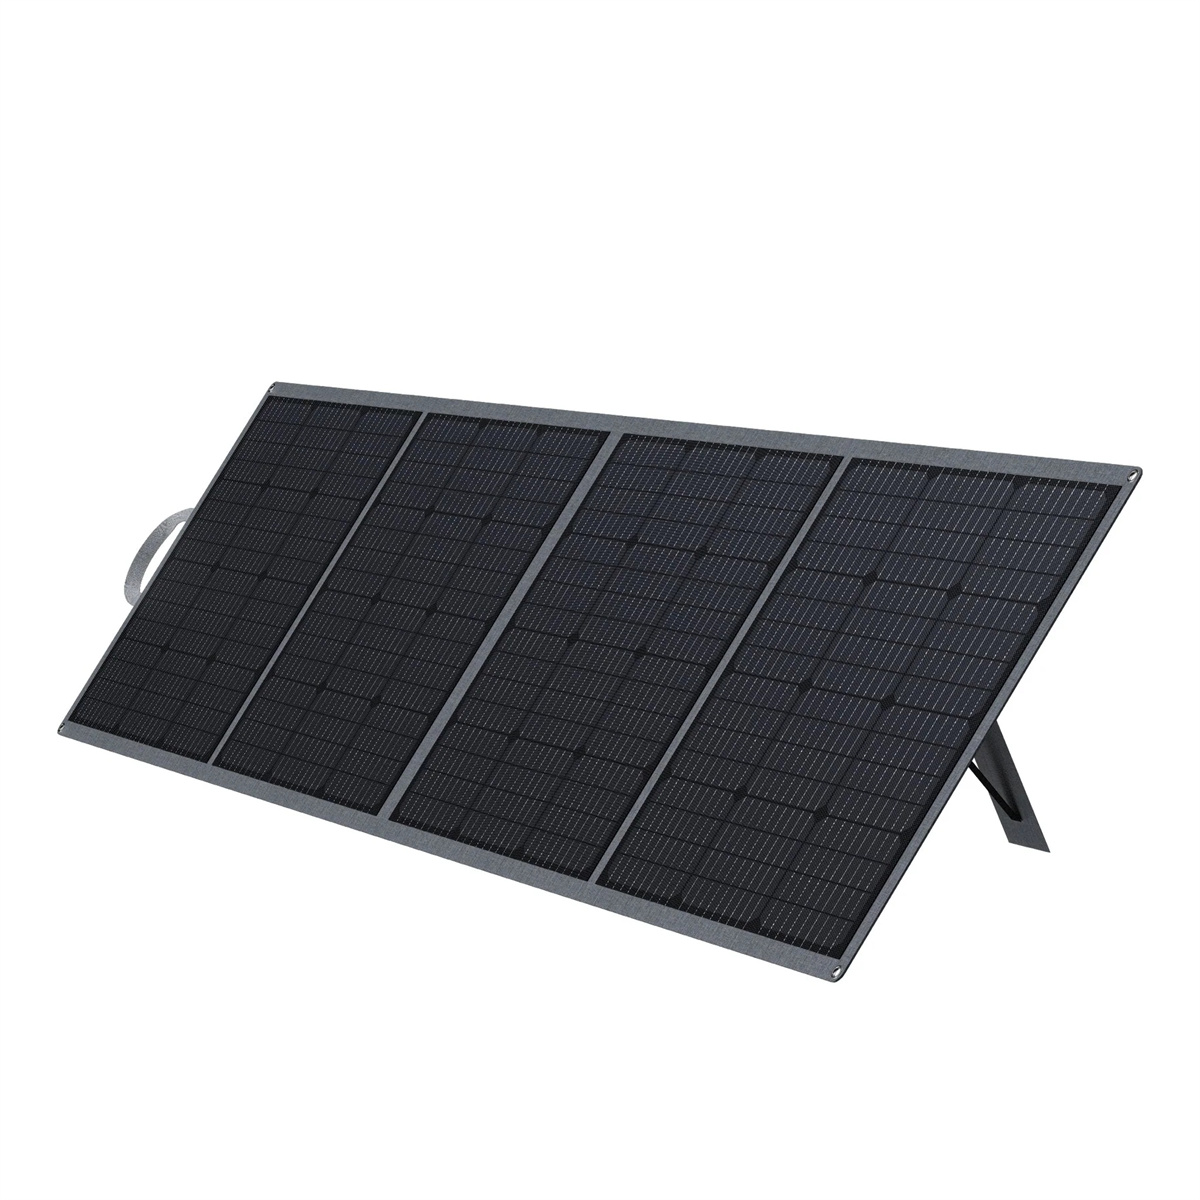 [US Direct] DaranEner SP300 300W ETFE Solar Panel for NEO2000 Solar Generator 5V USB＆36.3V DC Solar Panels 22.0% Efficiency Portable Foldable Solar Panel for Patio, RV, Outdoors Camping, Power Outage, Emergency